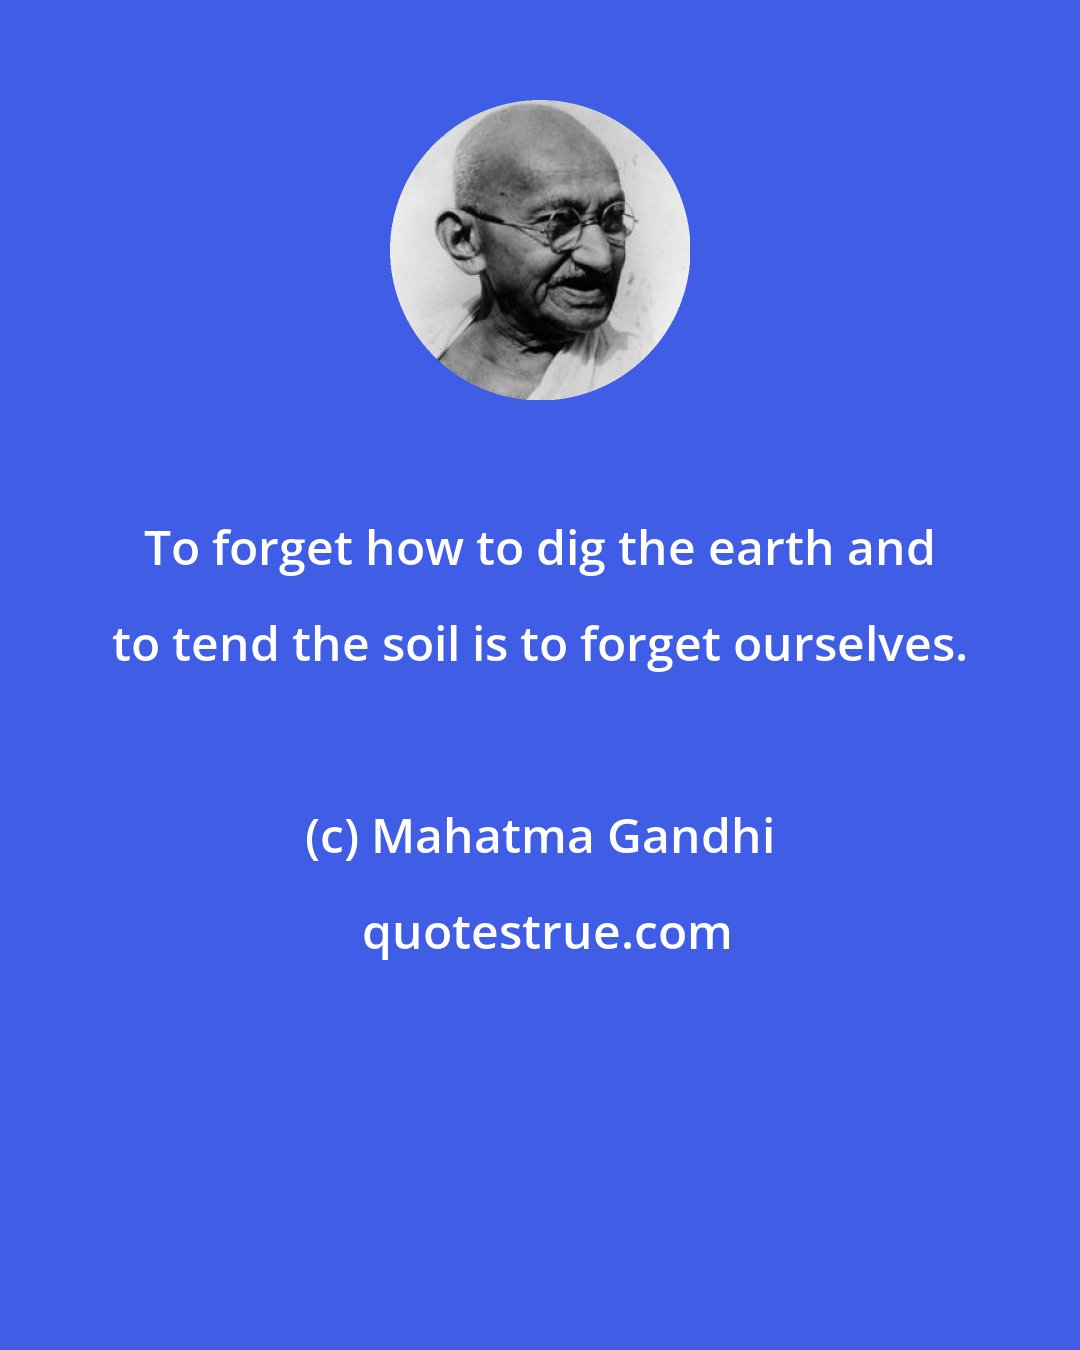 Mahatma Gandhi: To forget how to dig the earth and to tend the soil is to forget ourselves.